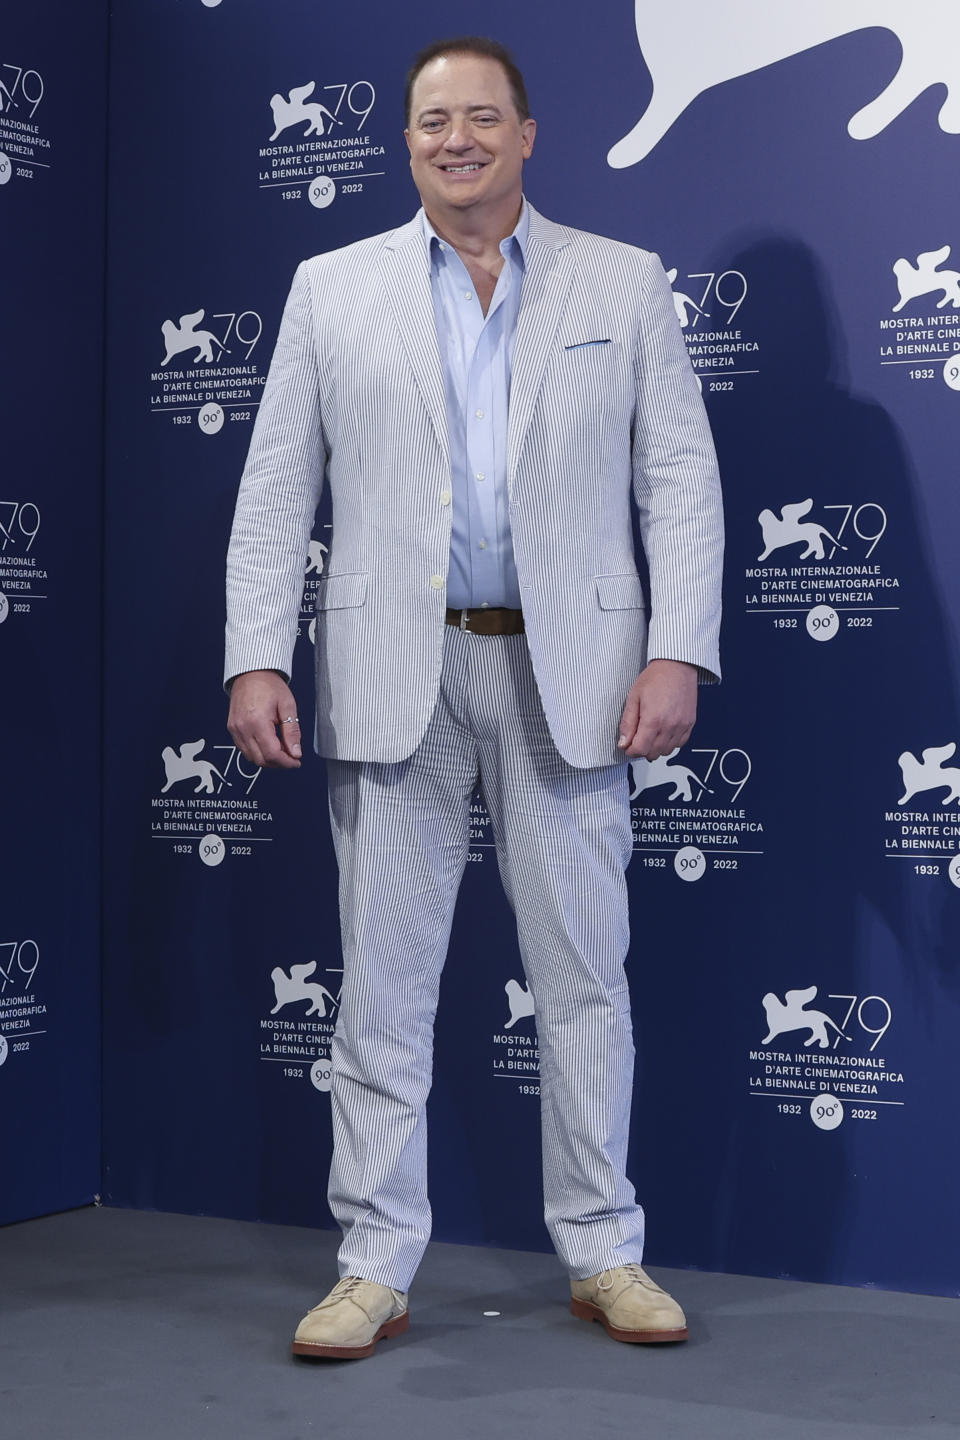 Brendan Fraser poses for photographers at the photo call for the film 'The Whale' during the 79th edition of the Venice Film Festival in Venice, Italy, Sunday, Sept. 4, 2022. (Photo by Joel C Ryan/Invision/AP)